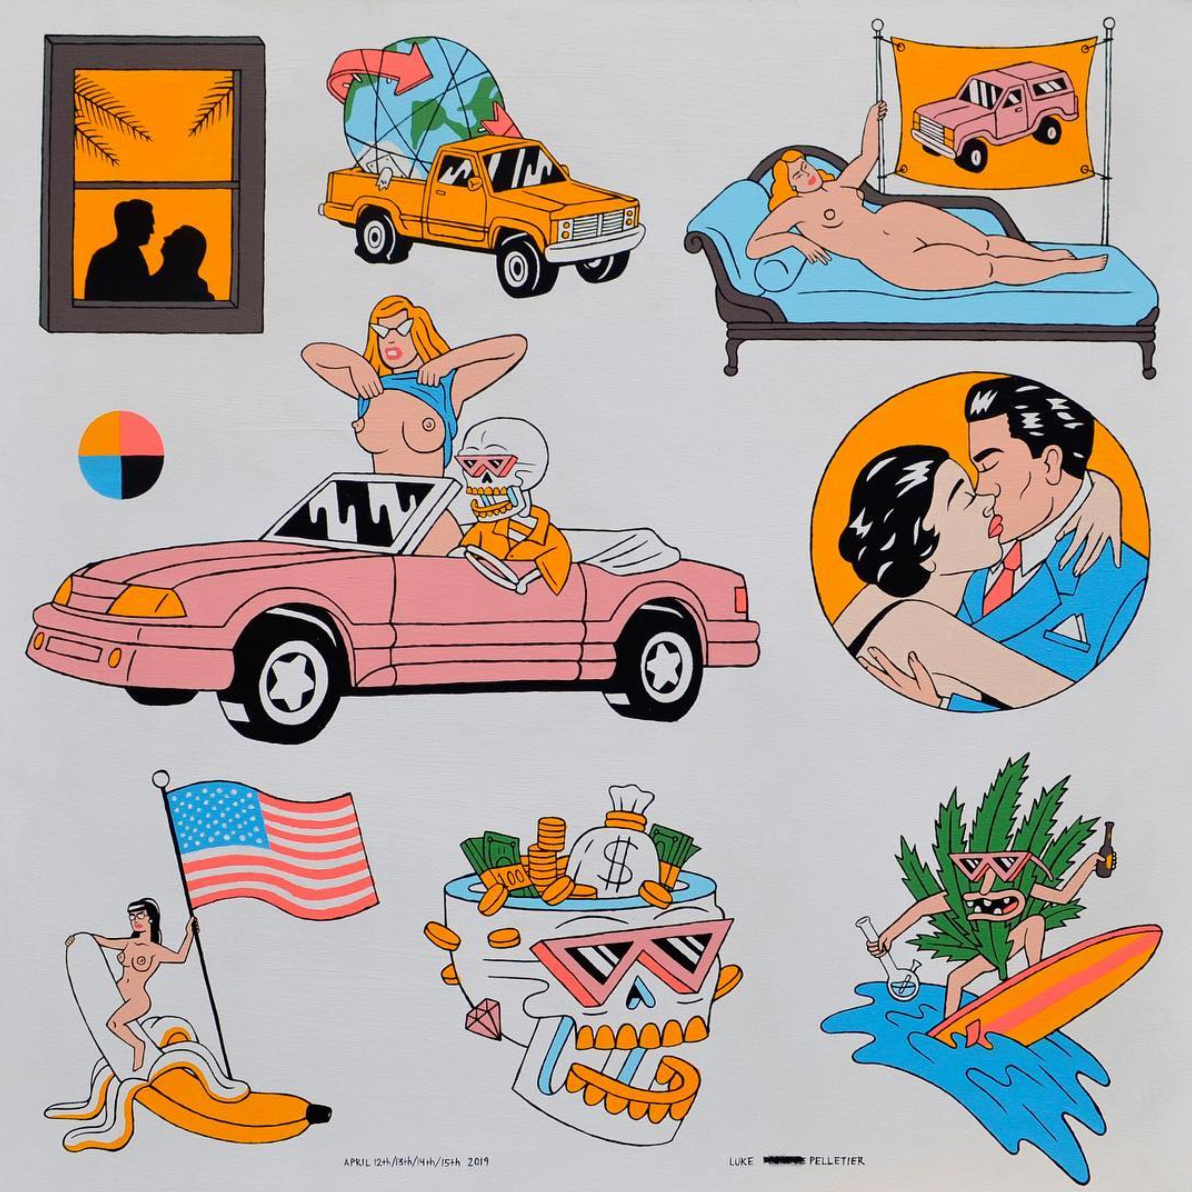 Luke Pelletier’s vibrant Americana inspired artwork is right up our alley and most likely yours too.